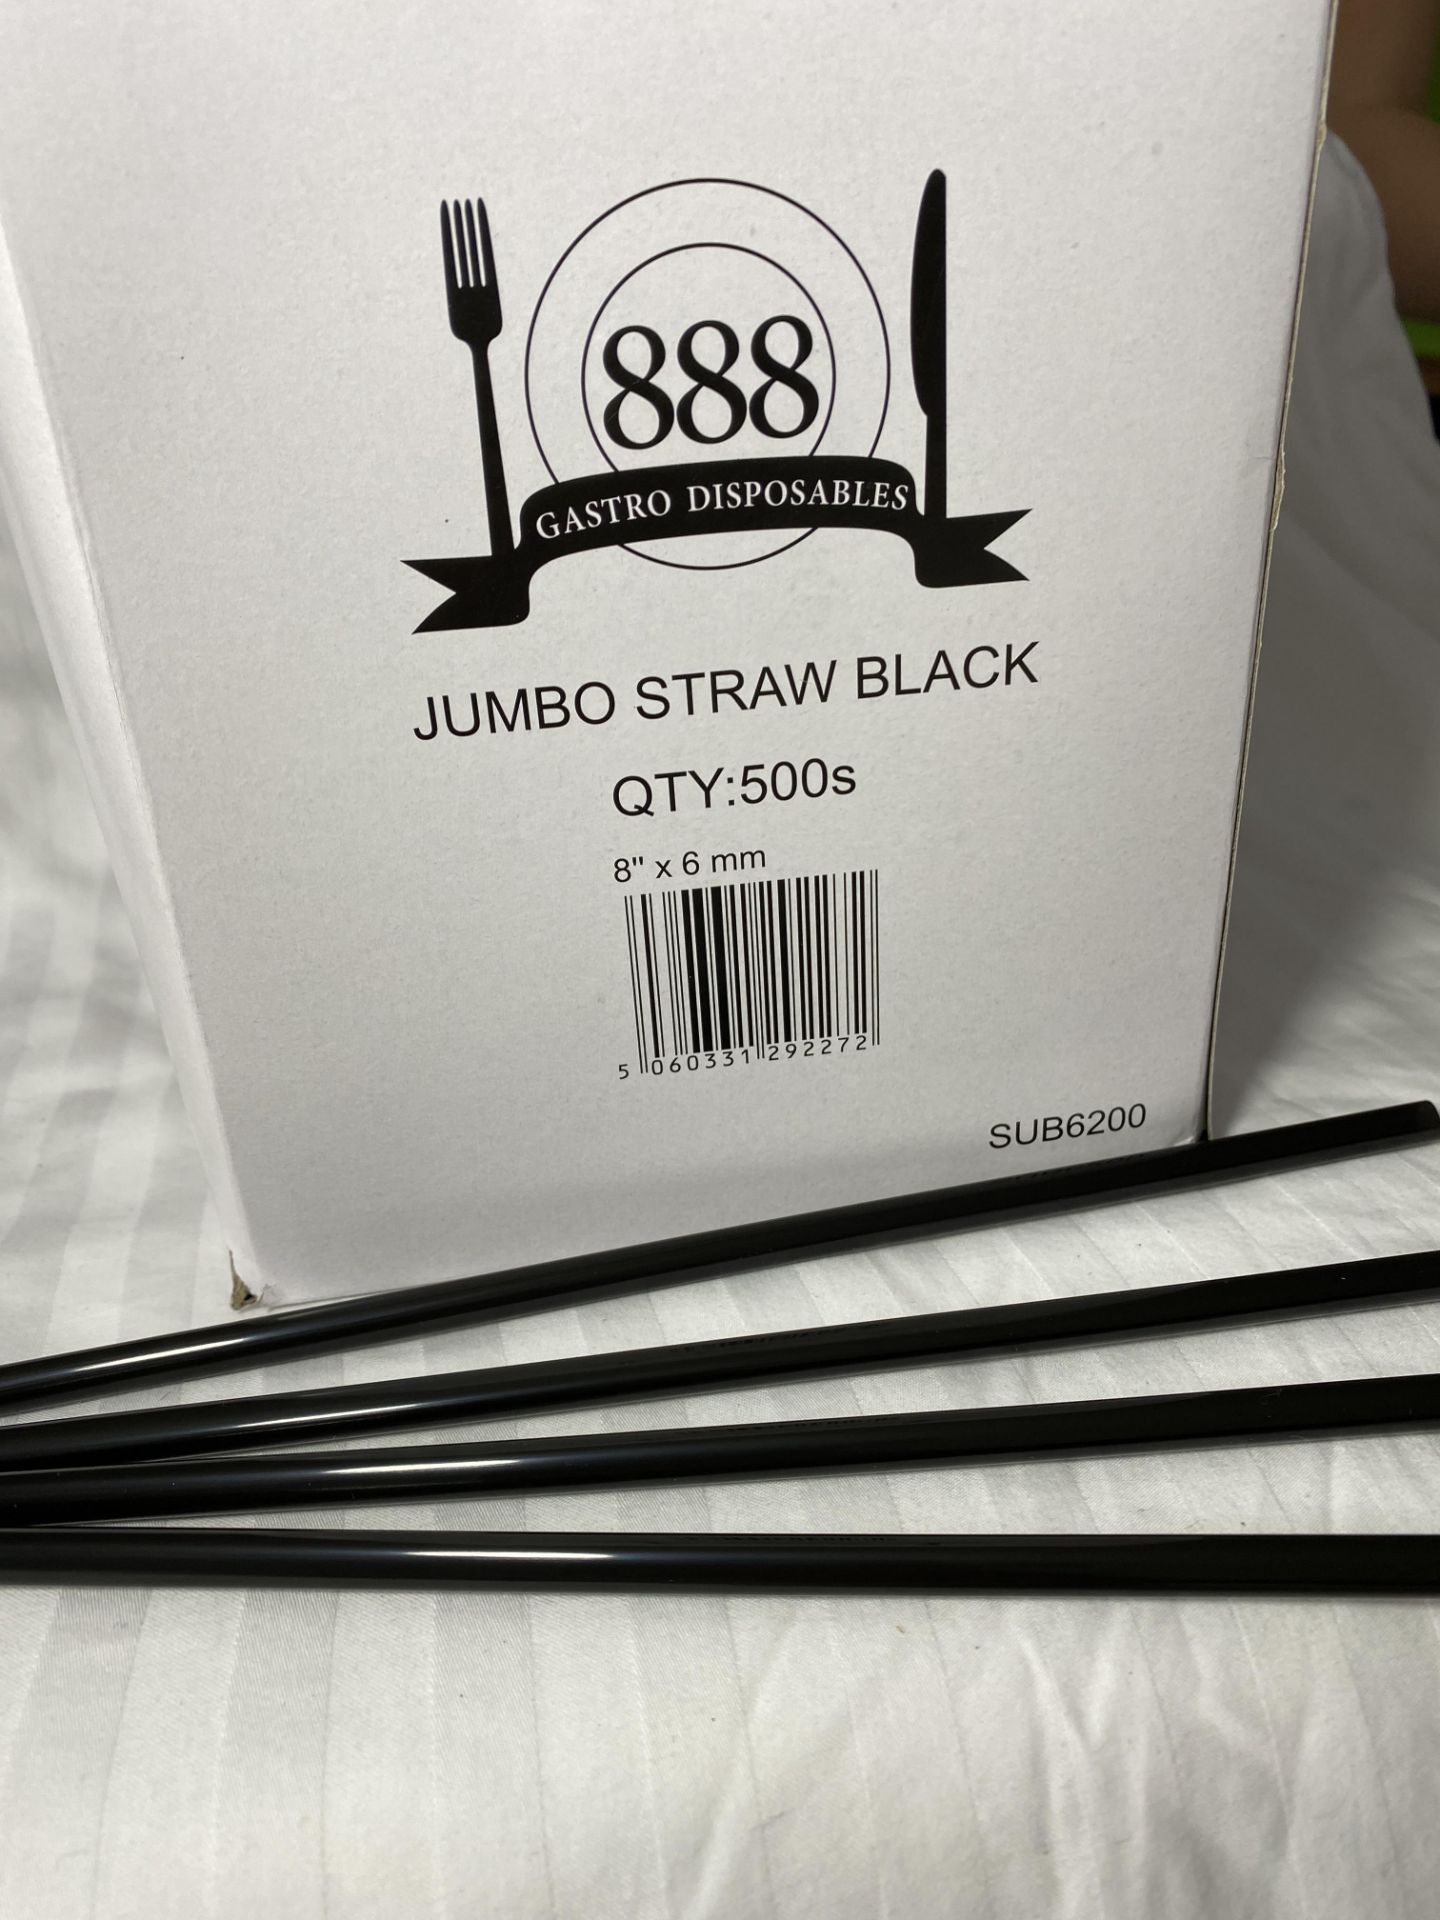 240000 X Jumbo Straw Black Straight 8" x 6mm in 24 boxes COLLECTION RADCLIFFE - Image 2 of 3